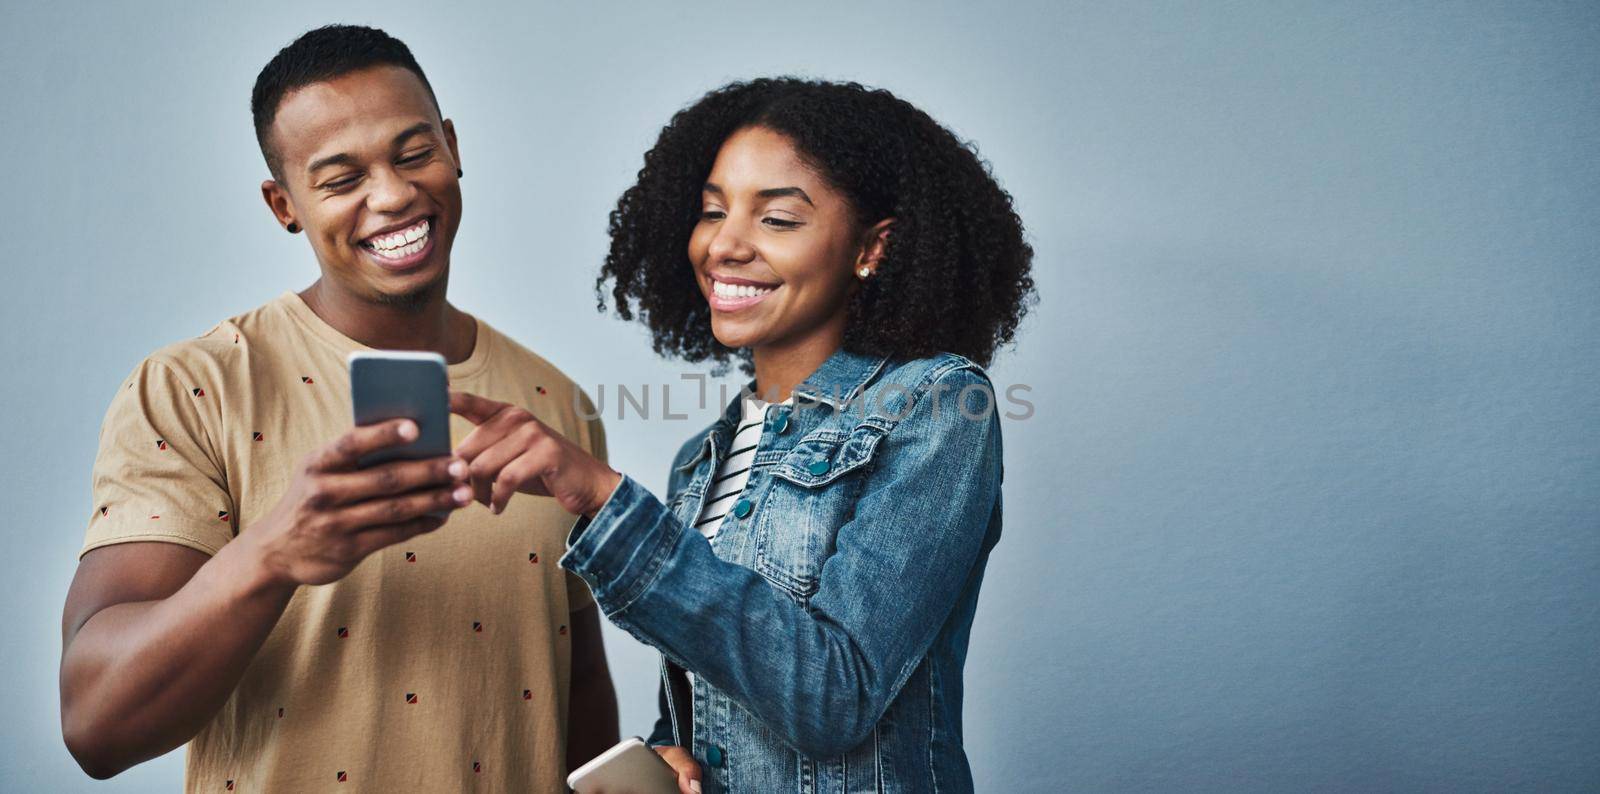 Studio shot of a young man and woman using a mobile phone together against a gray background.